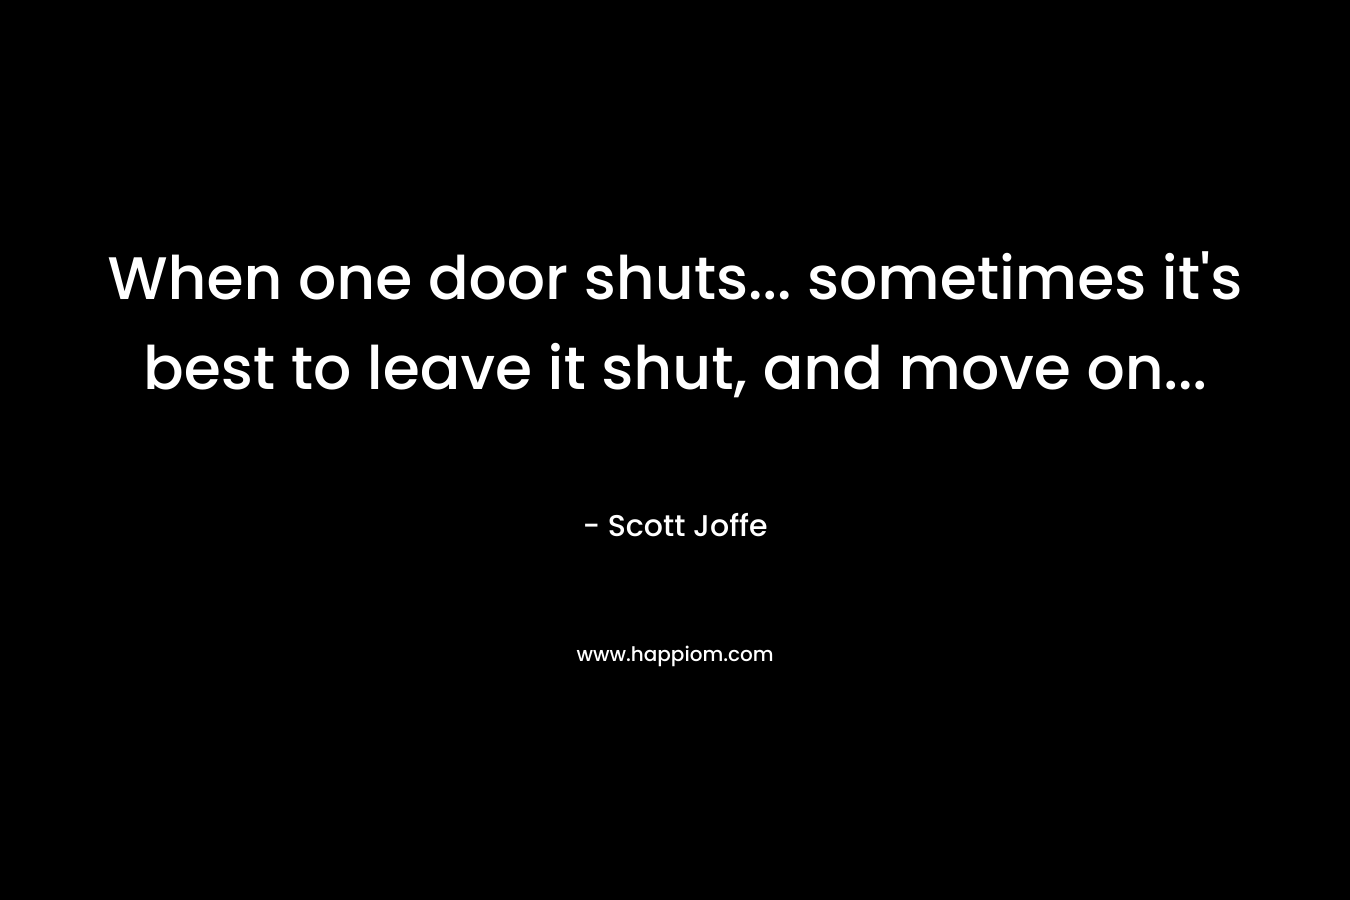 When one door shuts… sometimes it’s best to leave it shut, and move on… – Scott Joffe